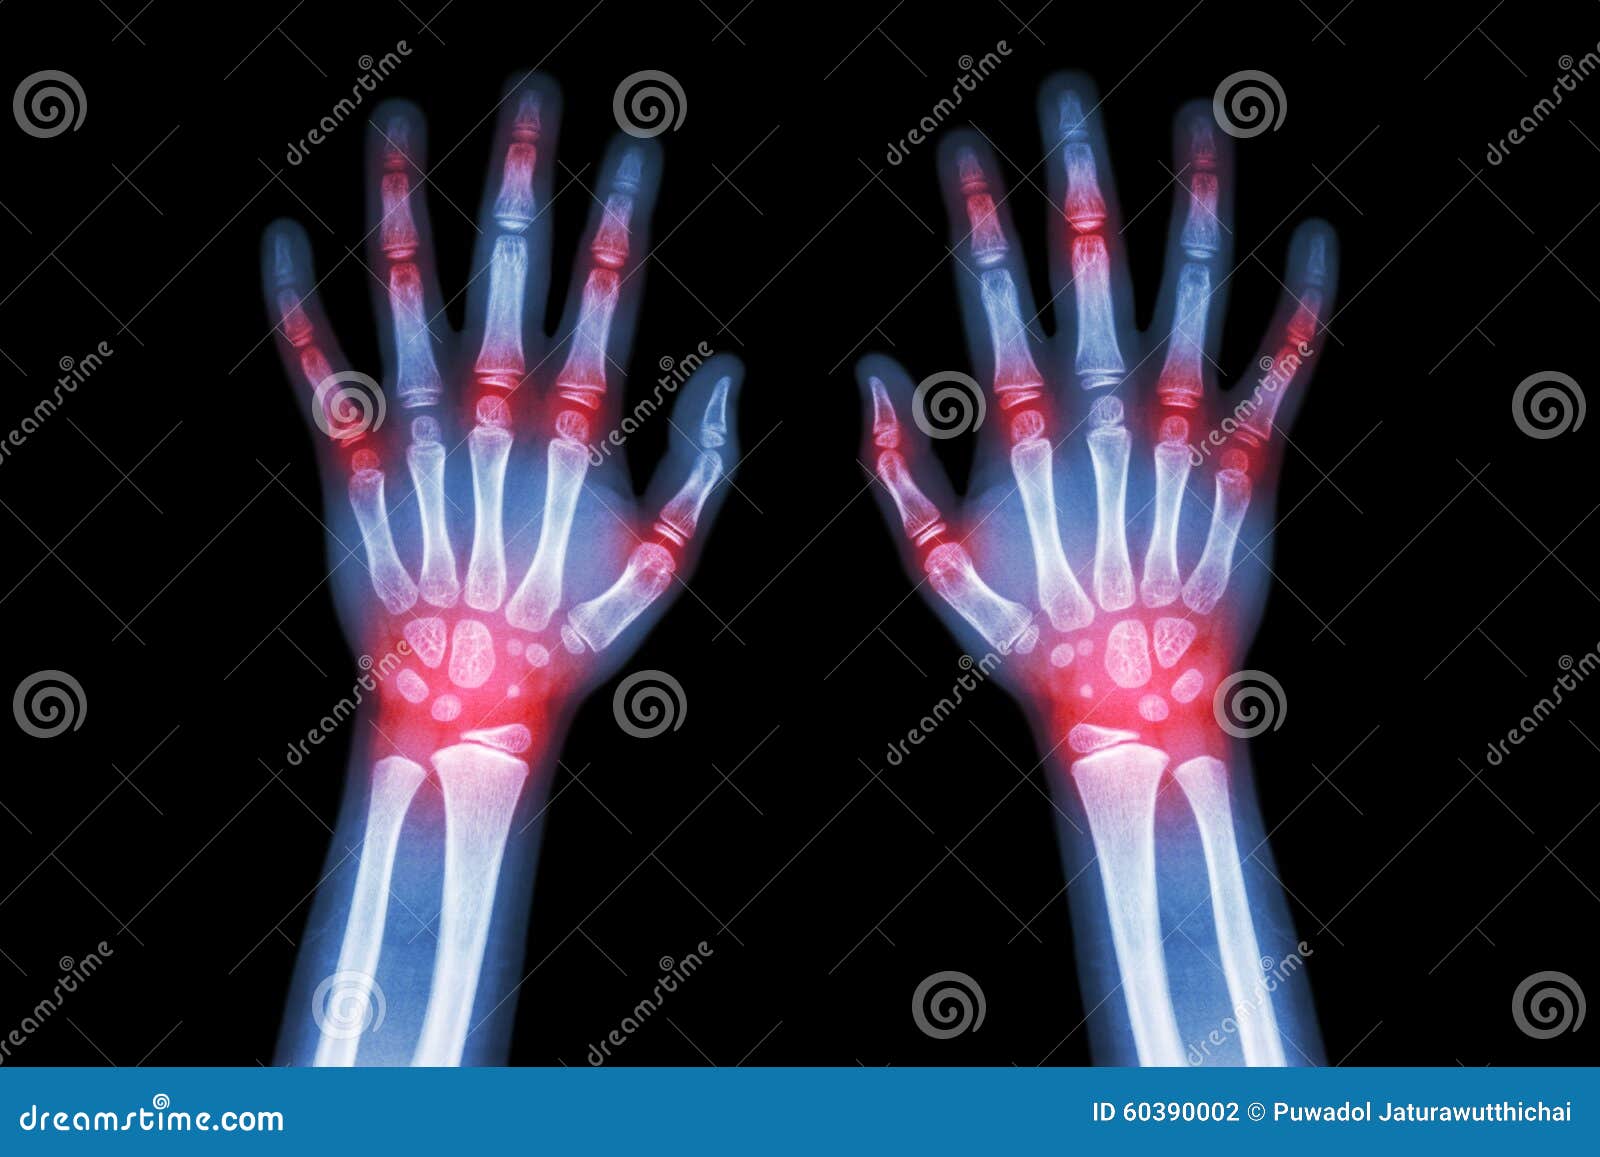 rheumatoid arthritis , gout arthritis ( film x-ray both hands of child with multiple joint arthritis ) ( medical , science and he